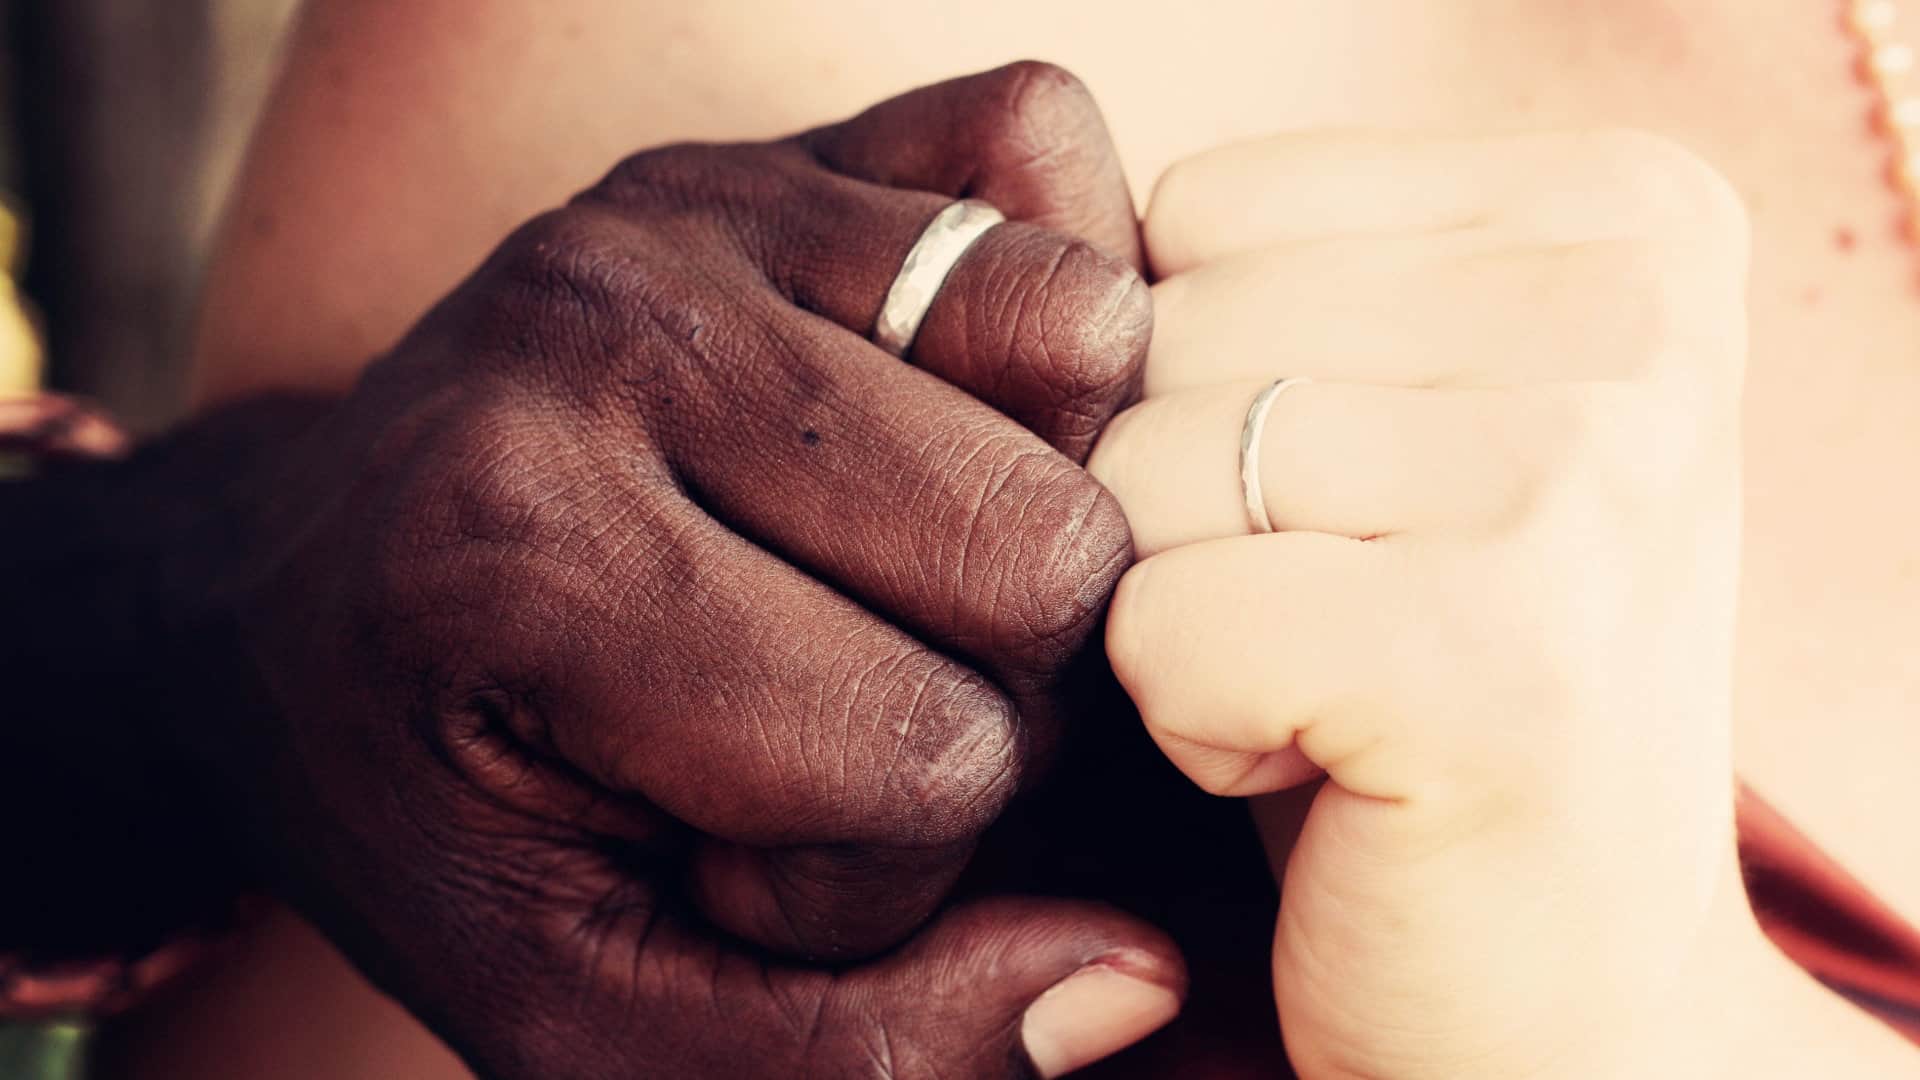 Two hands, one Caucasian, the other Black and wearing wedding rings, are shown up close with knuckles together.